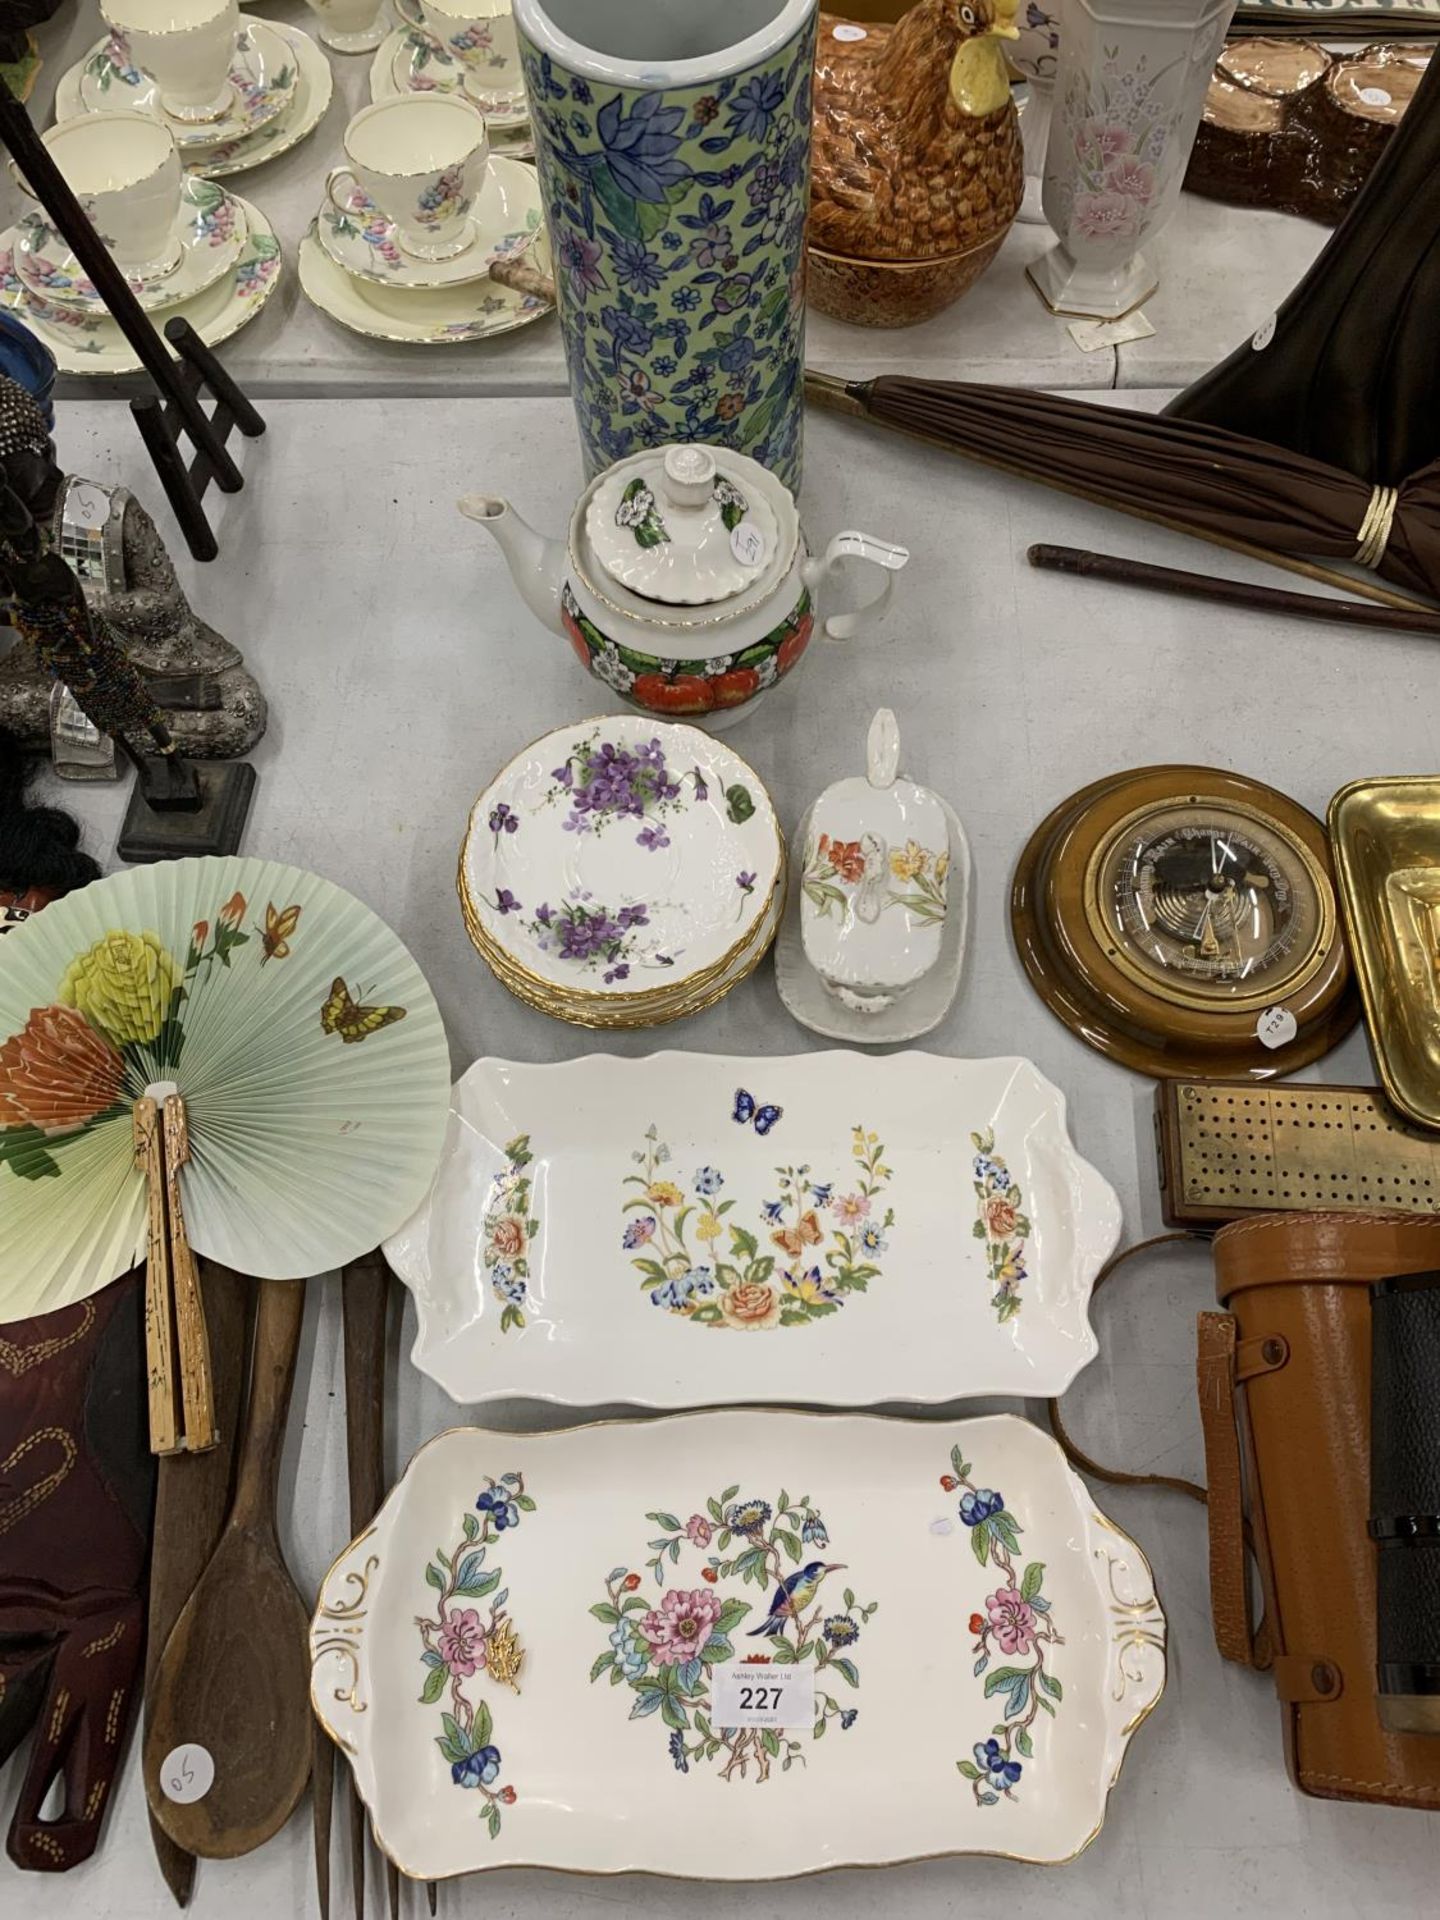 A QUANTITY OF CERAMIC ITEMS TO INCLUDE AYNSLEY SANDWICH TRAYS, A VASE, TEAPOT, PLATES, ETC - Image 2 of 6